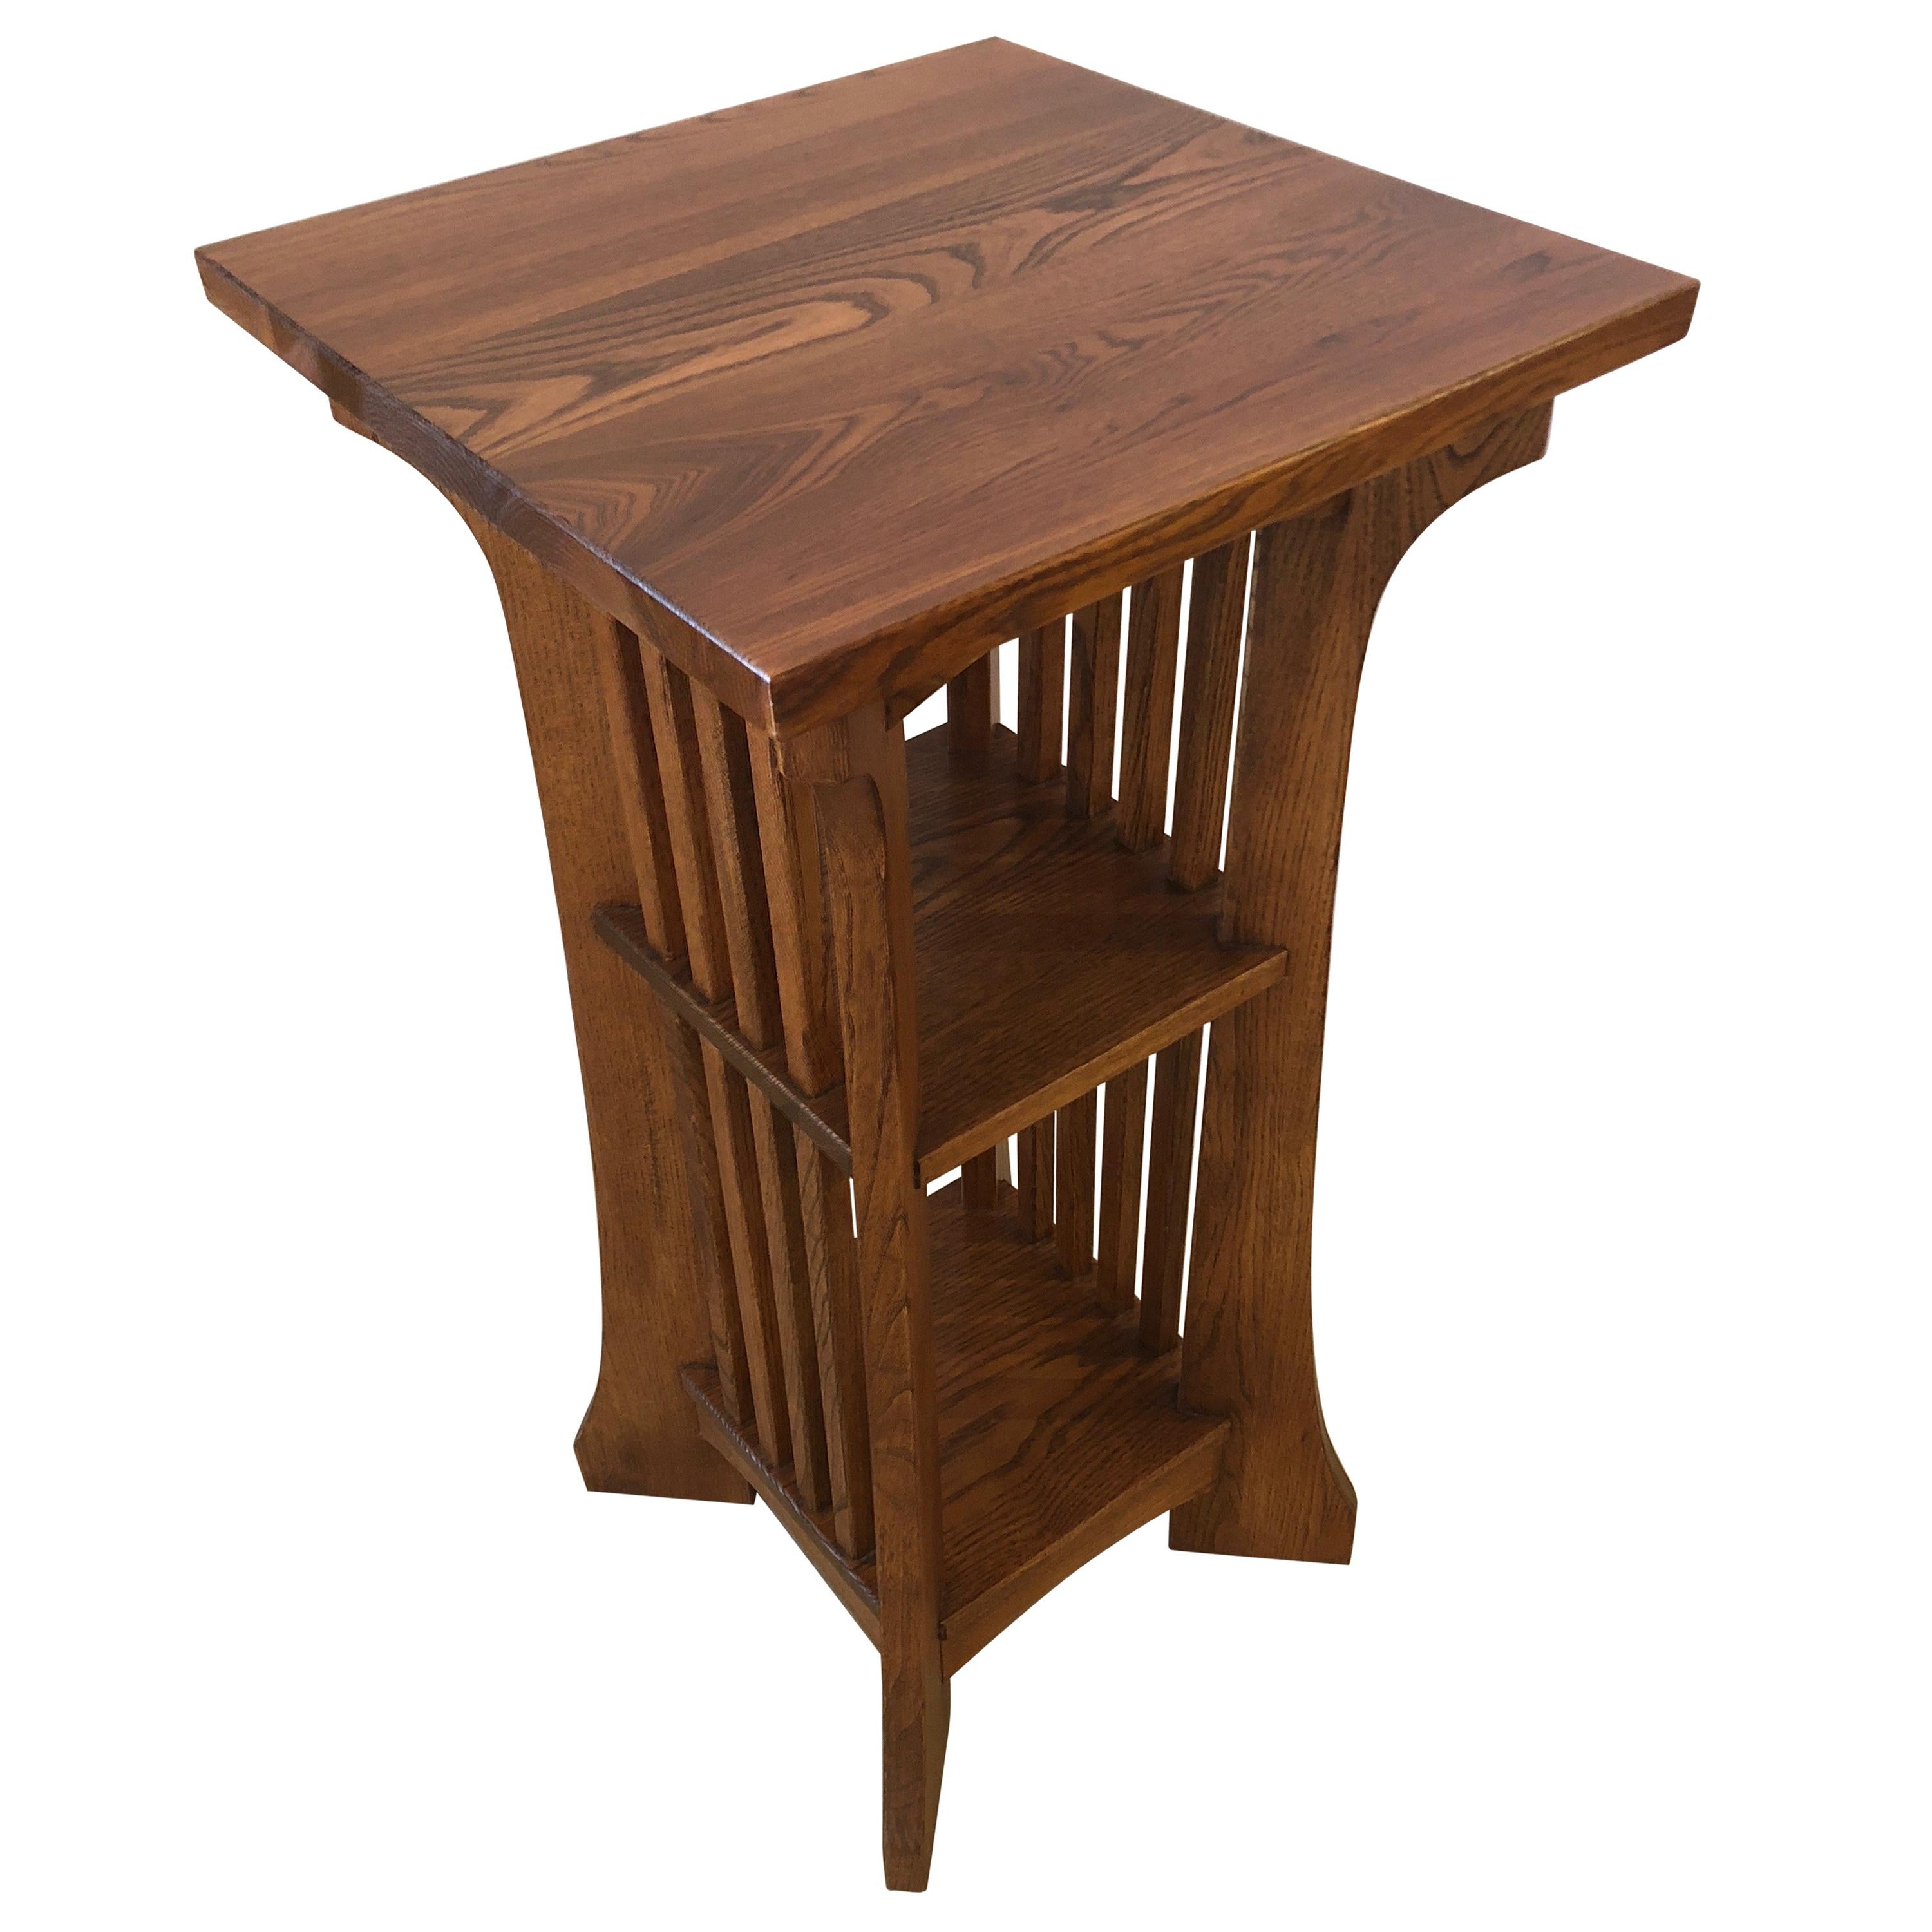 Handsome Oak Arts & Crafts Mission Style Side Table with Two Shelves